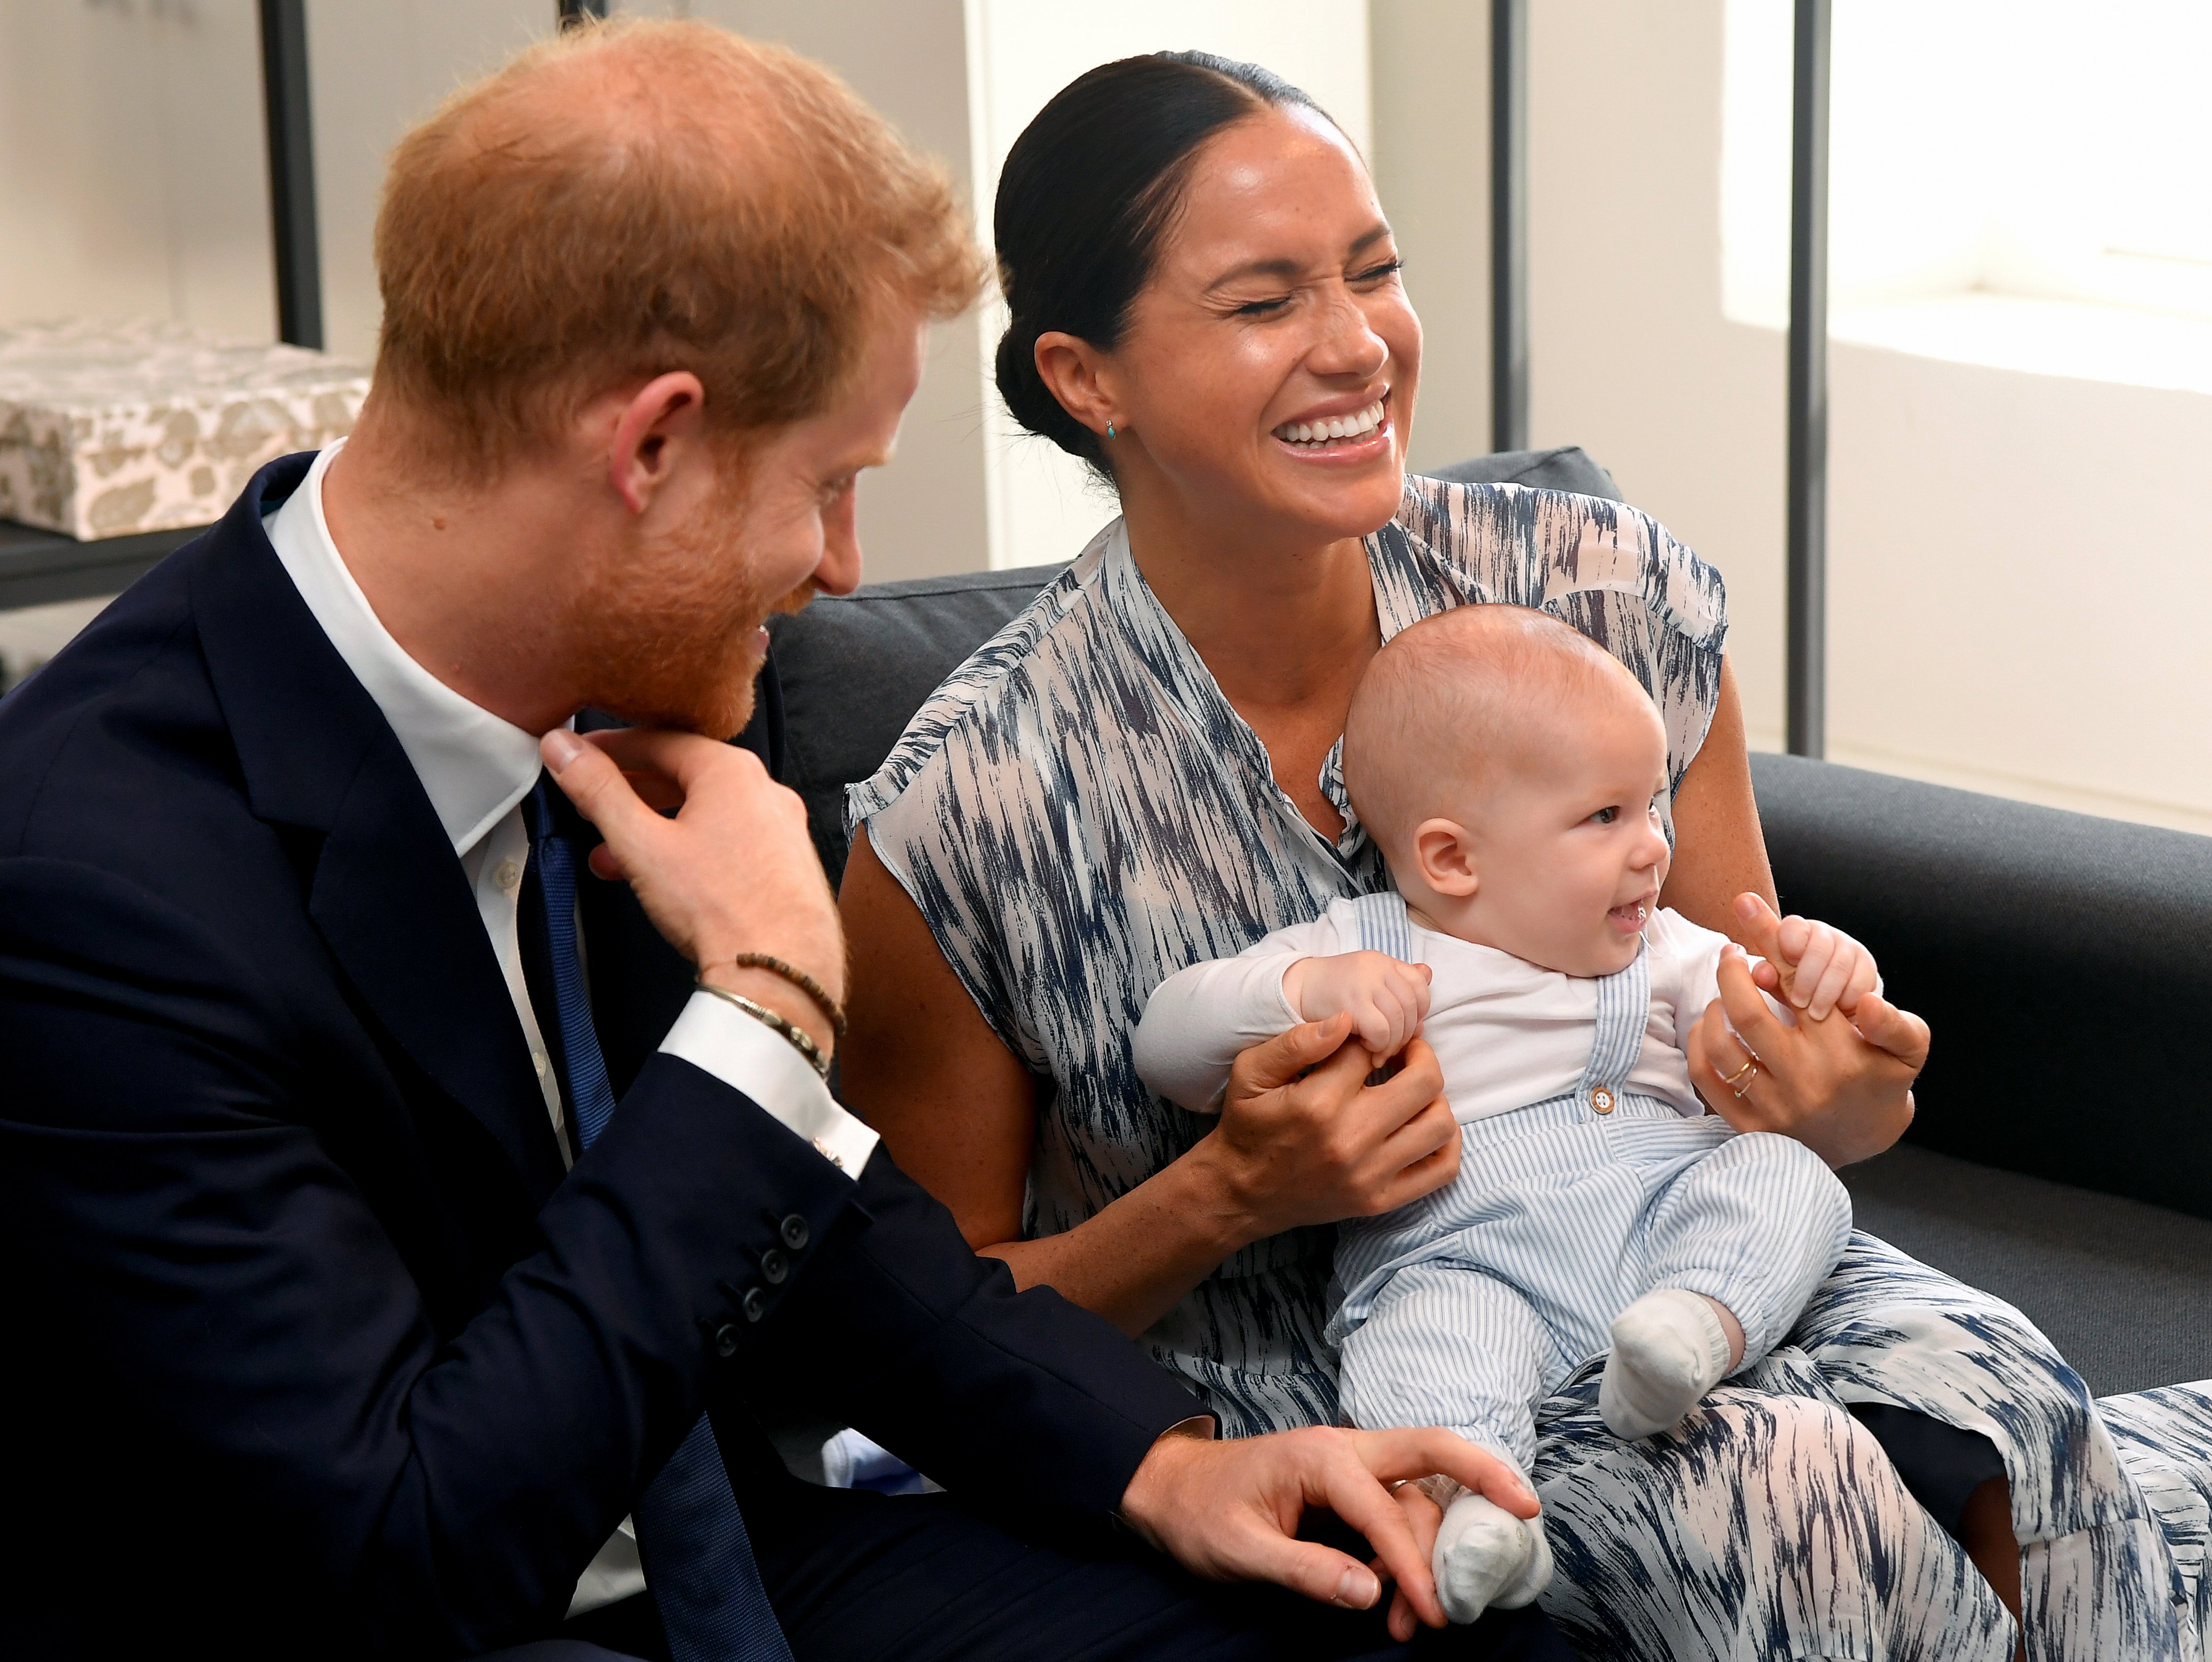 Prince Harry, Meghan Markle & their son Archie meet Archbishop Desmond Tutu in Cape Town, South Africa on Sept. 25, 2019 | Photo: Getty Images